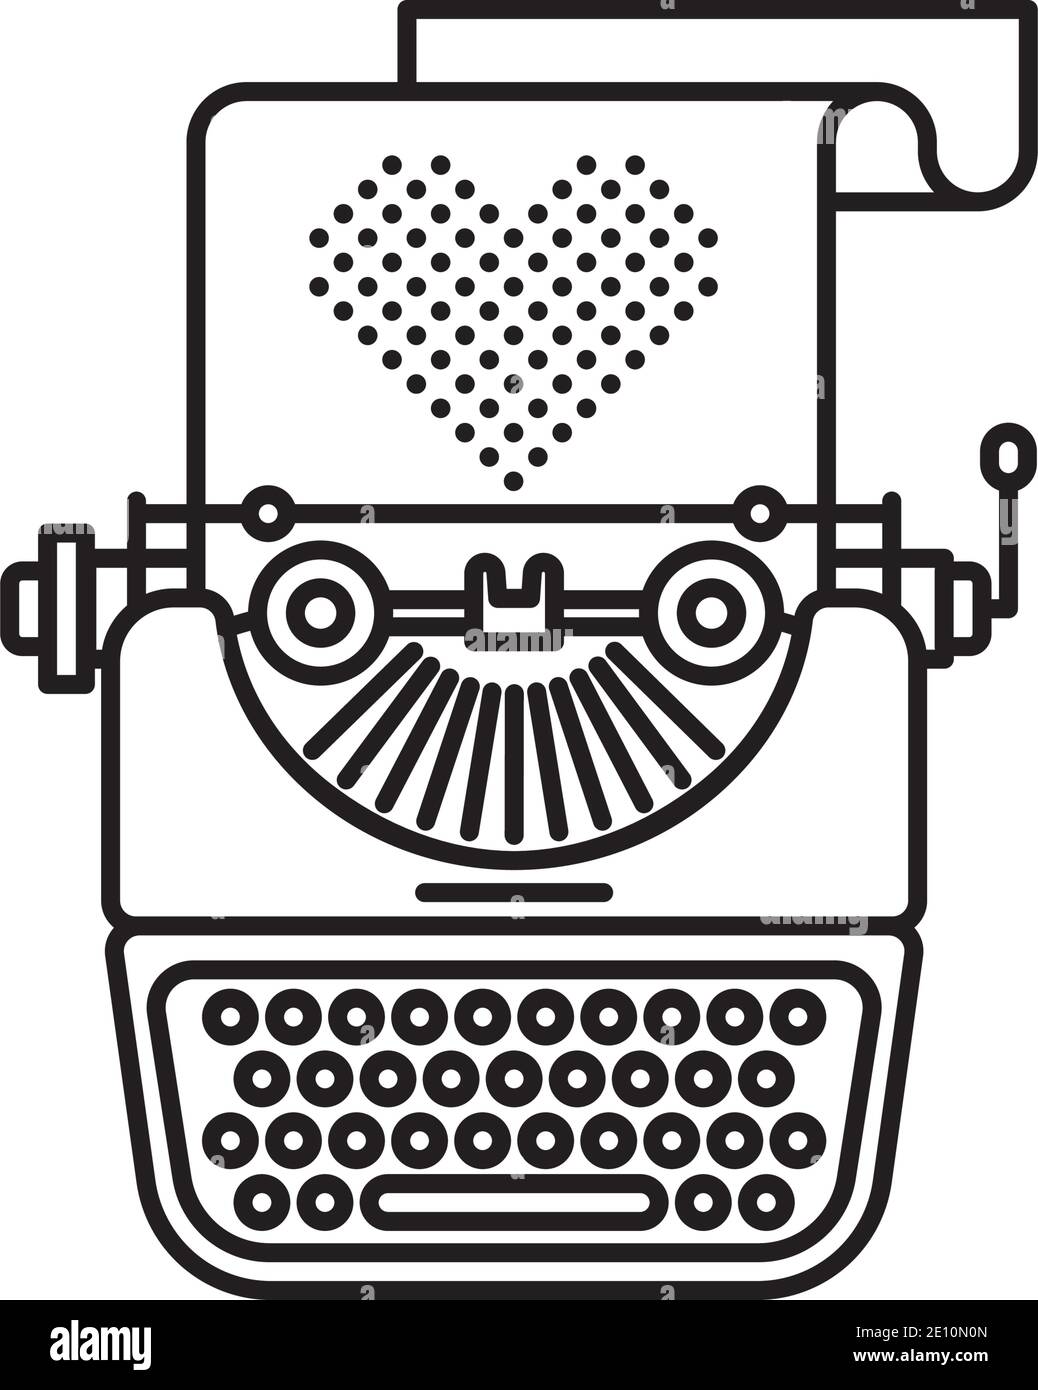 Love letter or valentines greetings written on vintage typewriter vector line icon for Valentines Day Stock Vector